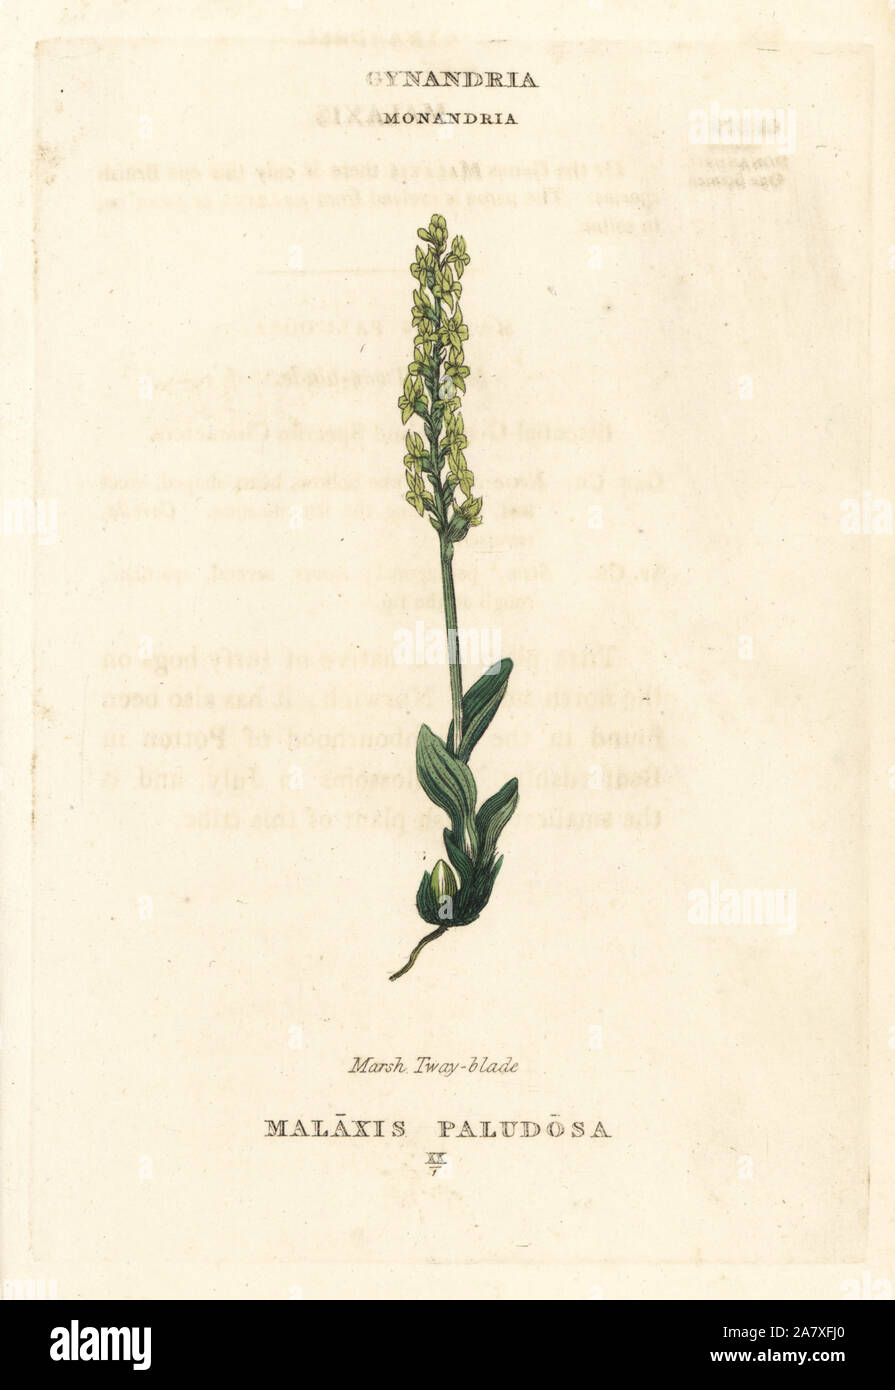 Bog orchid, Hammarbya paludosa (Marsh tway-blade, Malaxis paludosa). Handcoloured copperplate engraving after an illustration by Richard Duppa from his The Classes and Orders of the Linnaean System of Botany, Longman, Hurst, London, 1816. Stock Photo